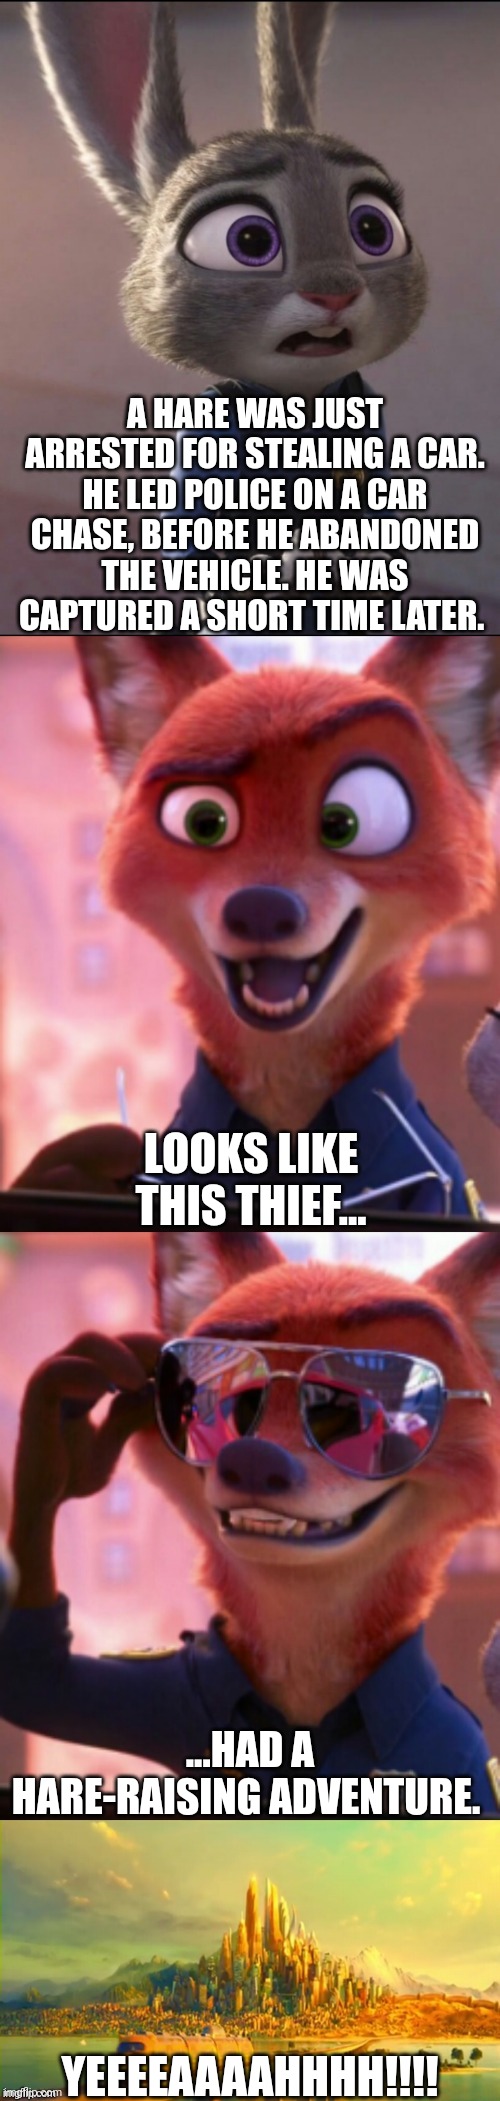 CSI: Zootopia 42 | A HARE WAS JUST ARRESTED FOR STEALING A CAR. HE LED POLICE ON A CAR CHASE, BEFORE HE ABANDONED THE VEHICLE. HE WAS CAPTURED A SHORT TIME LATER. LOOKS LIKE THIS THIEF... ...HAD A HARE-RAISING ADVENTURE. YEEEEAAAAHHHH!!!! | image tagged in csi zootopia,zootopia,judy hopps,nick wilde,parody,funny | made w/ Imgflip meme maker